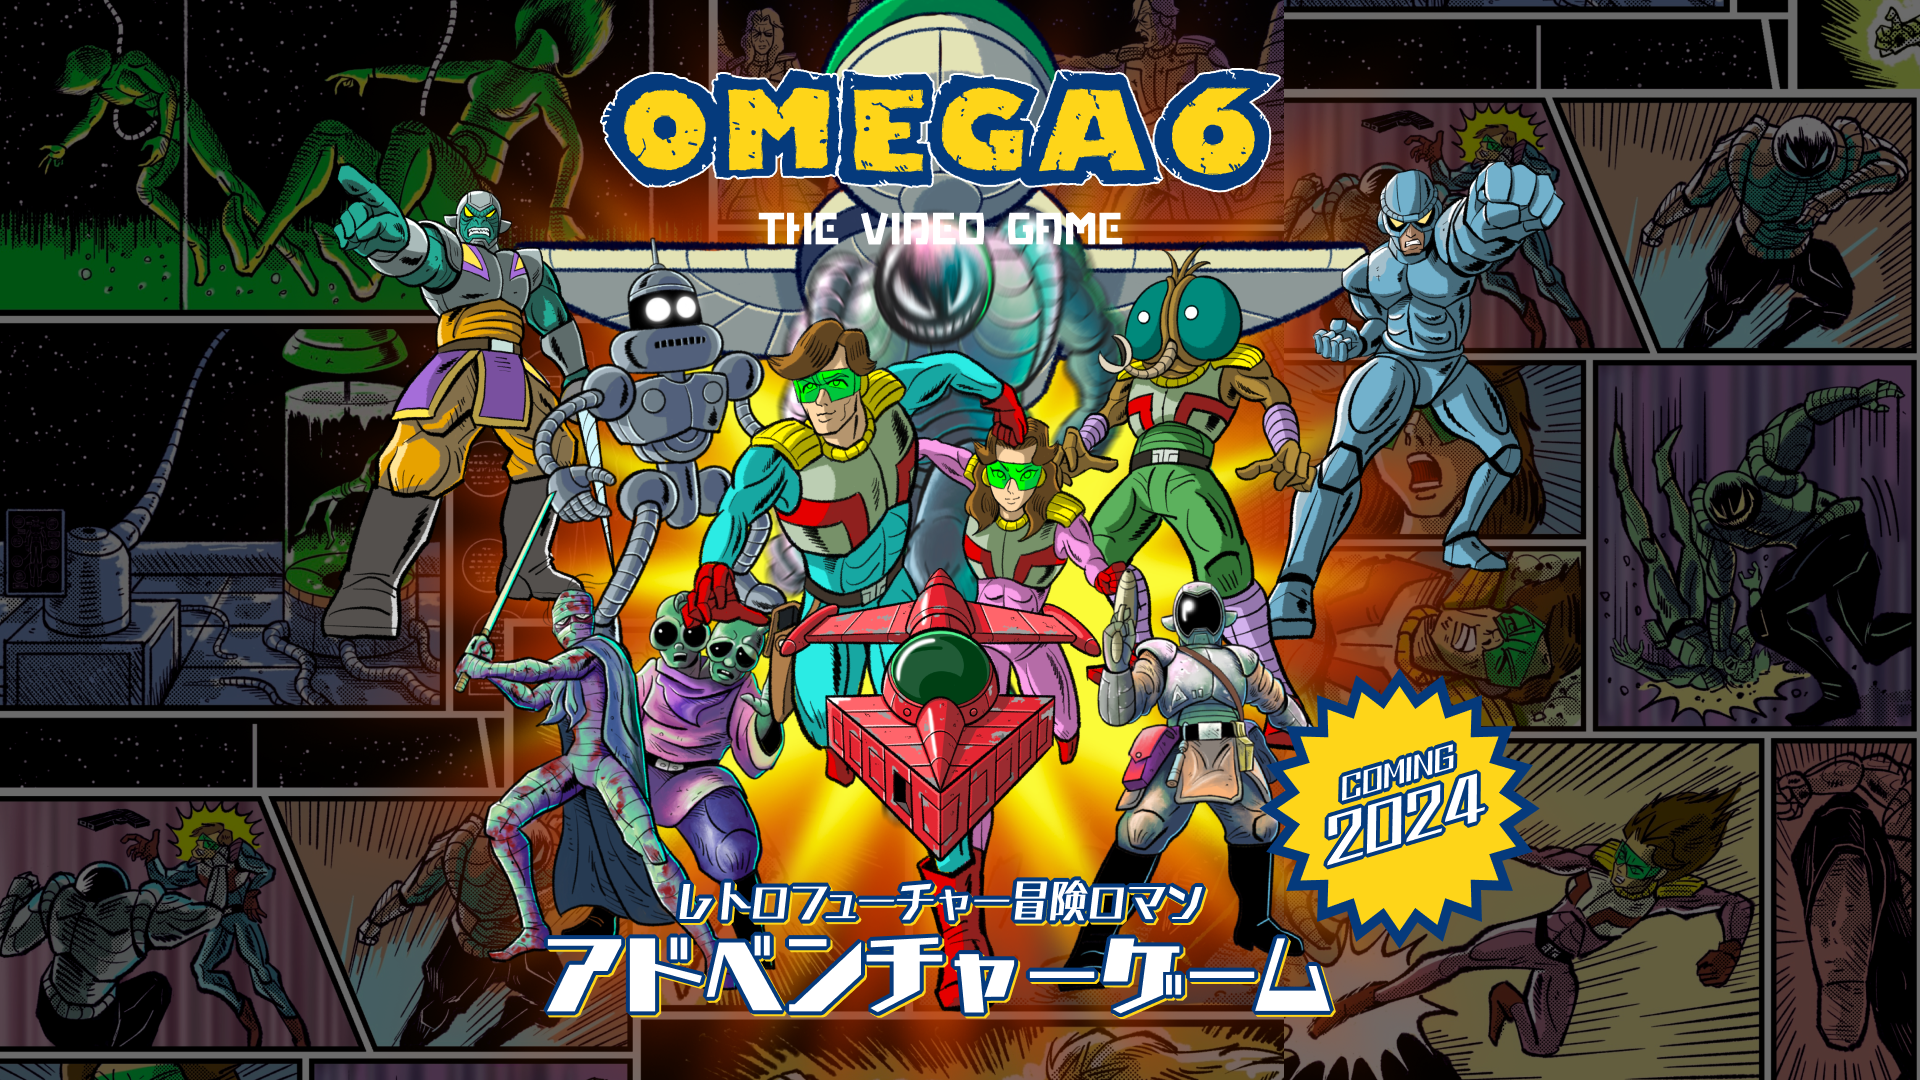 OMEGA 6 THE VIDEO GAME